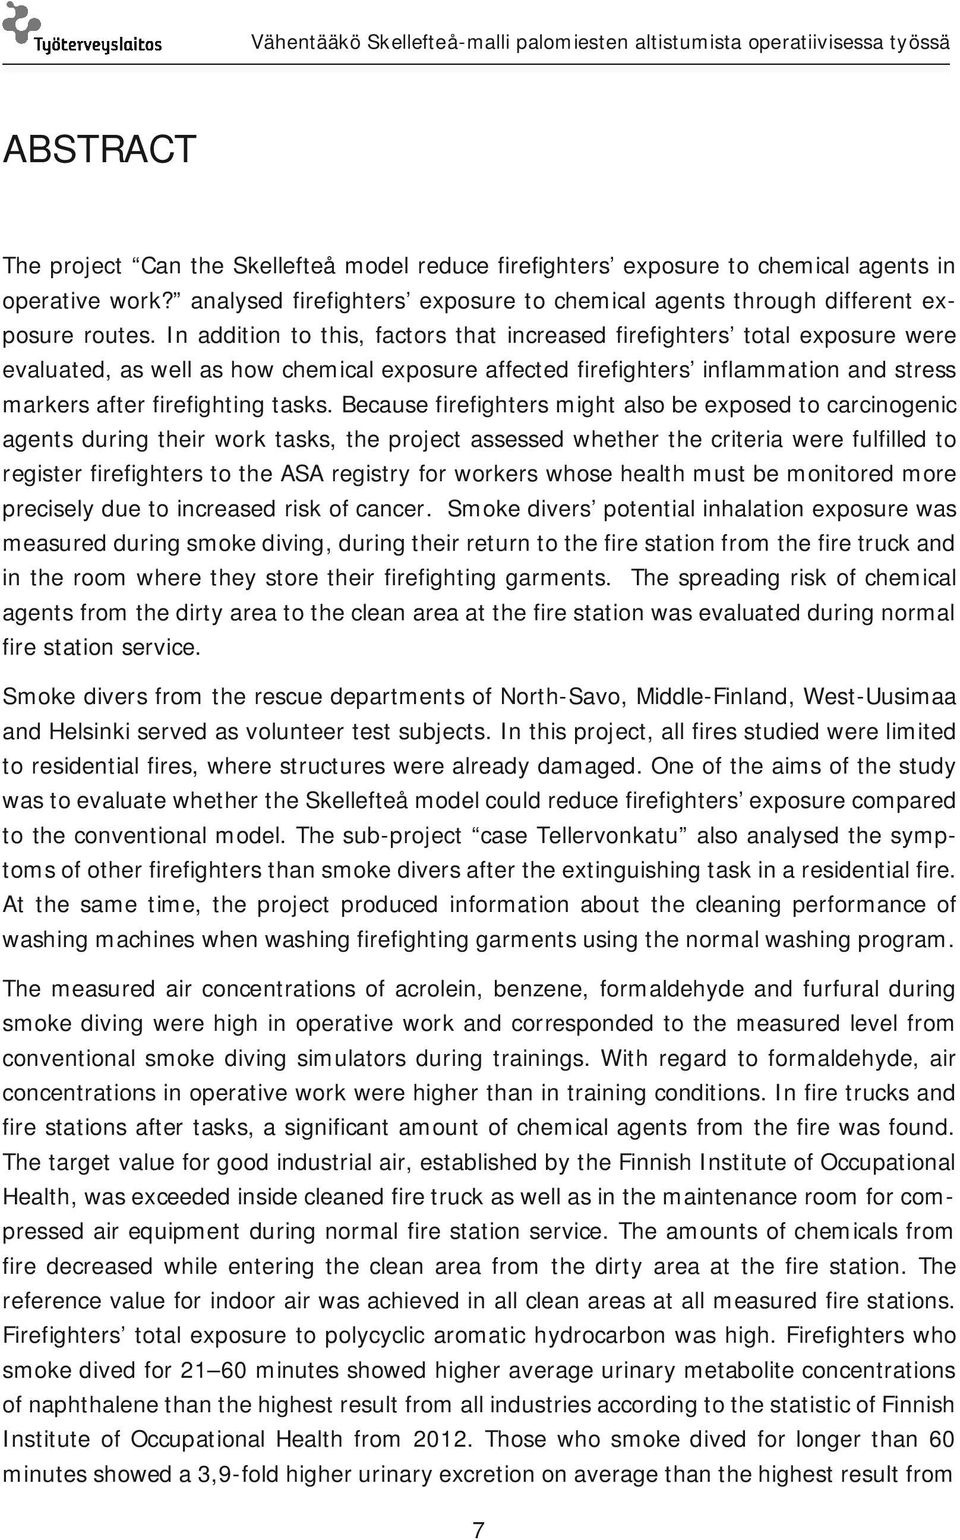 Because firefighters might also be exposed to carcinogenic agents during their work tasks, the project assessed whether the criteria were fulfilled to register firefighters to the ASA registry for